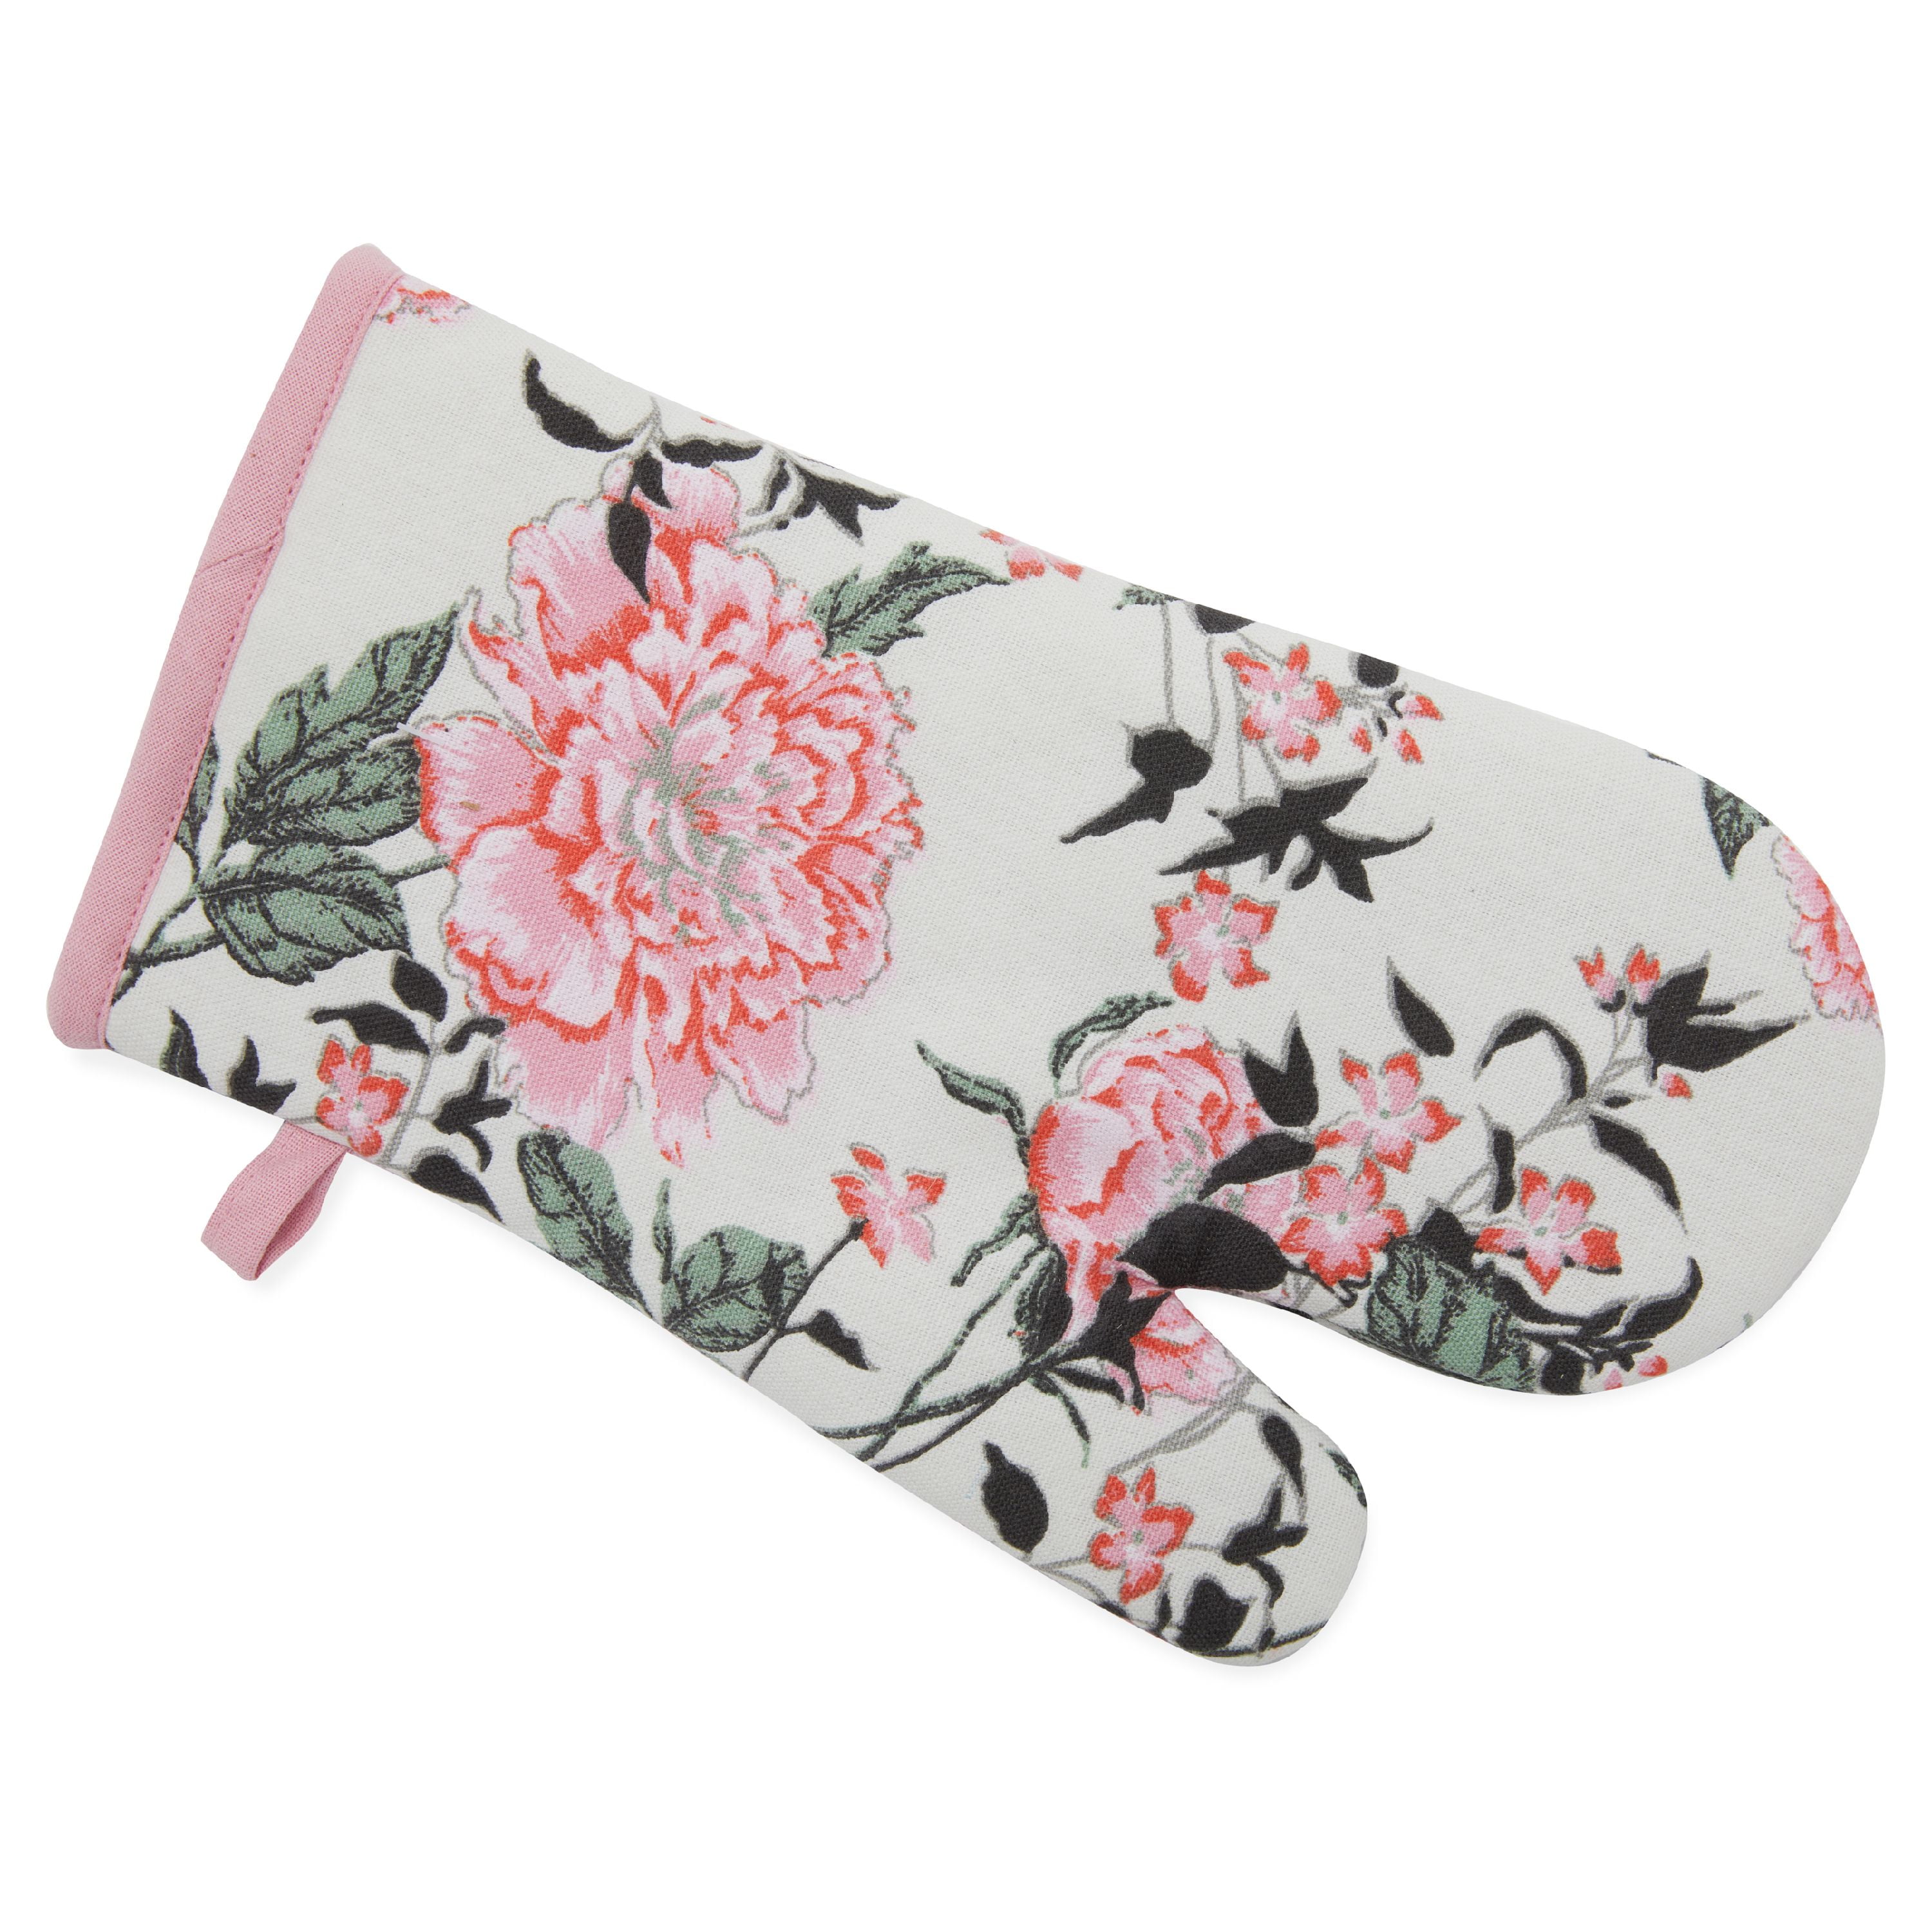 Oven Mitt Bake Happy Quilted Folk Floral